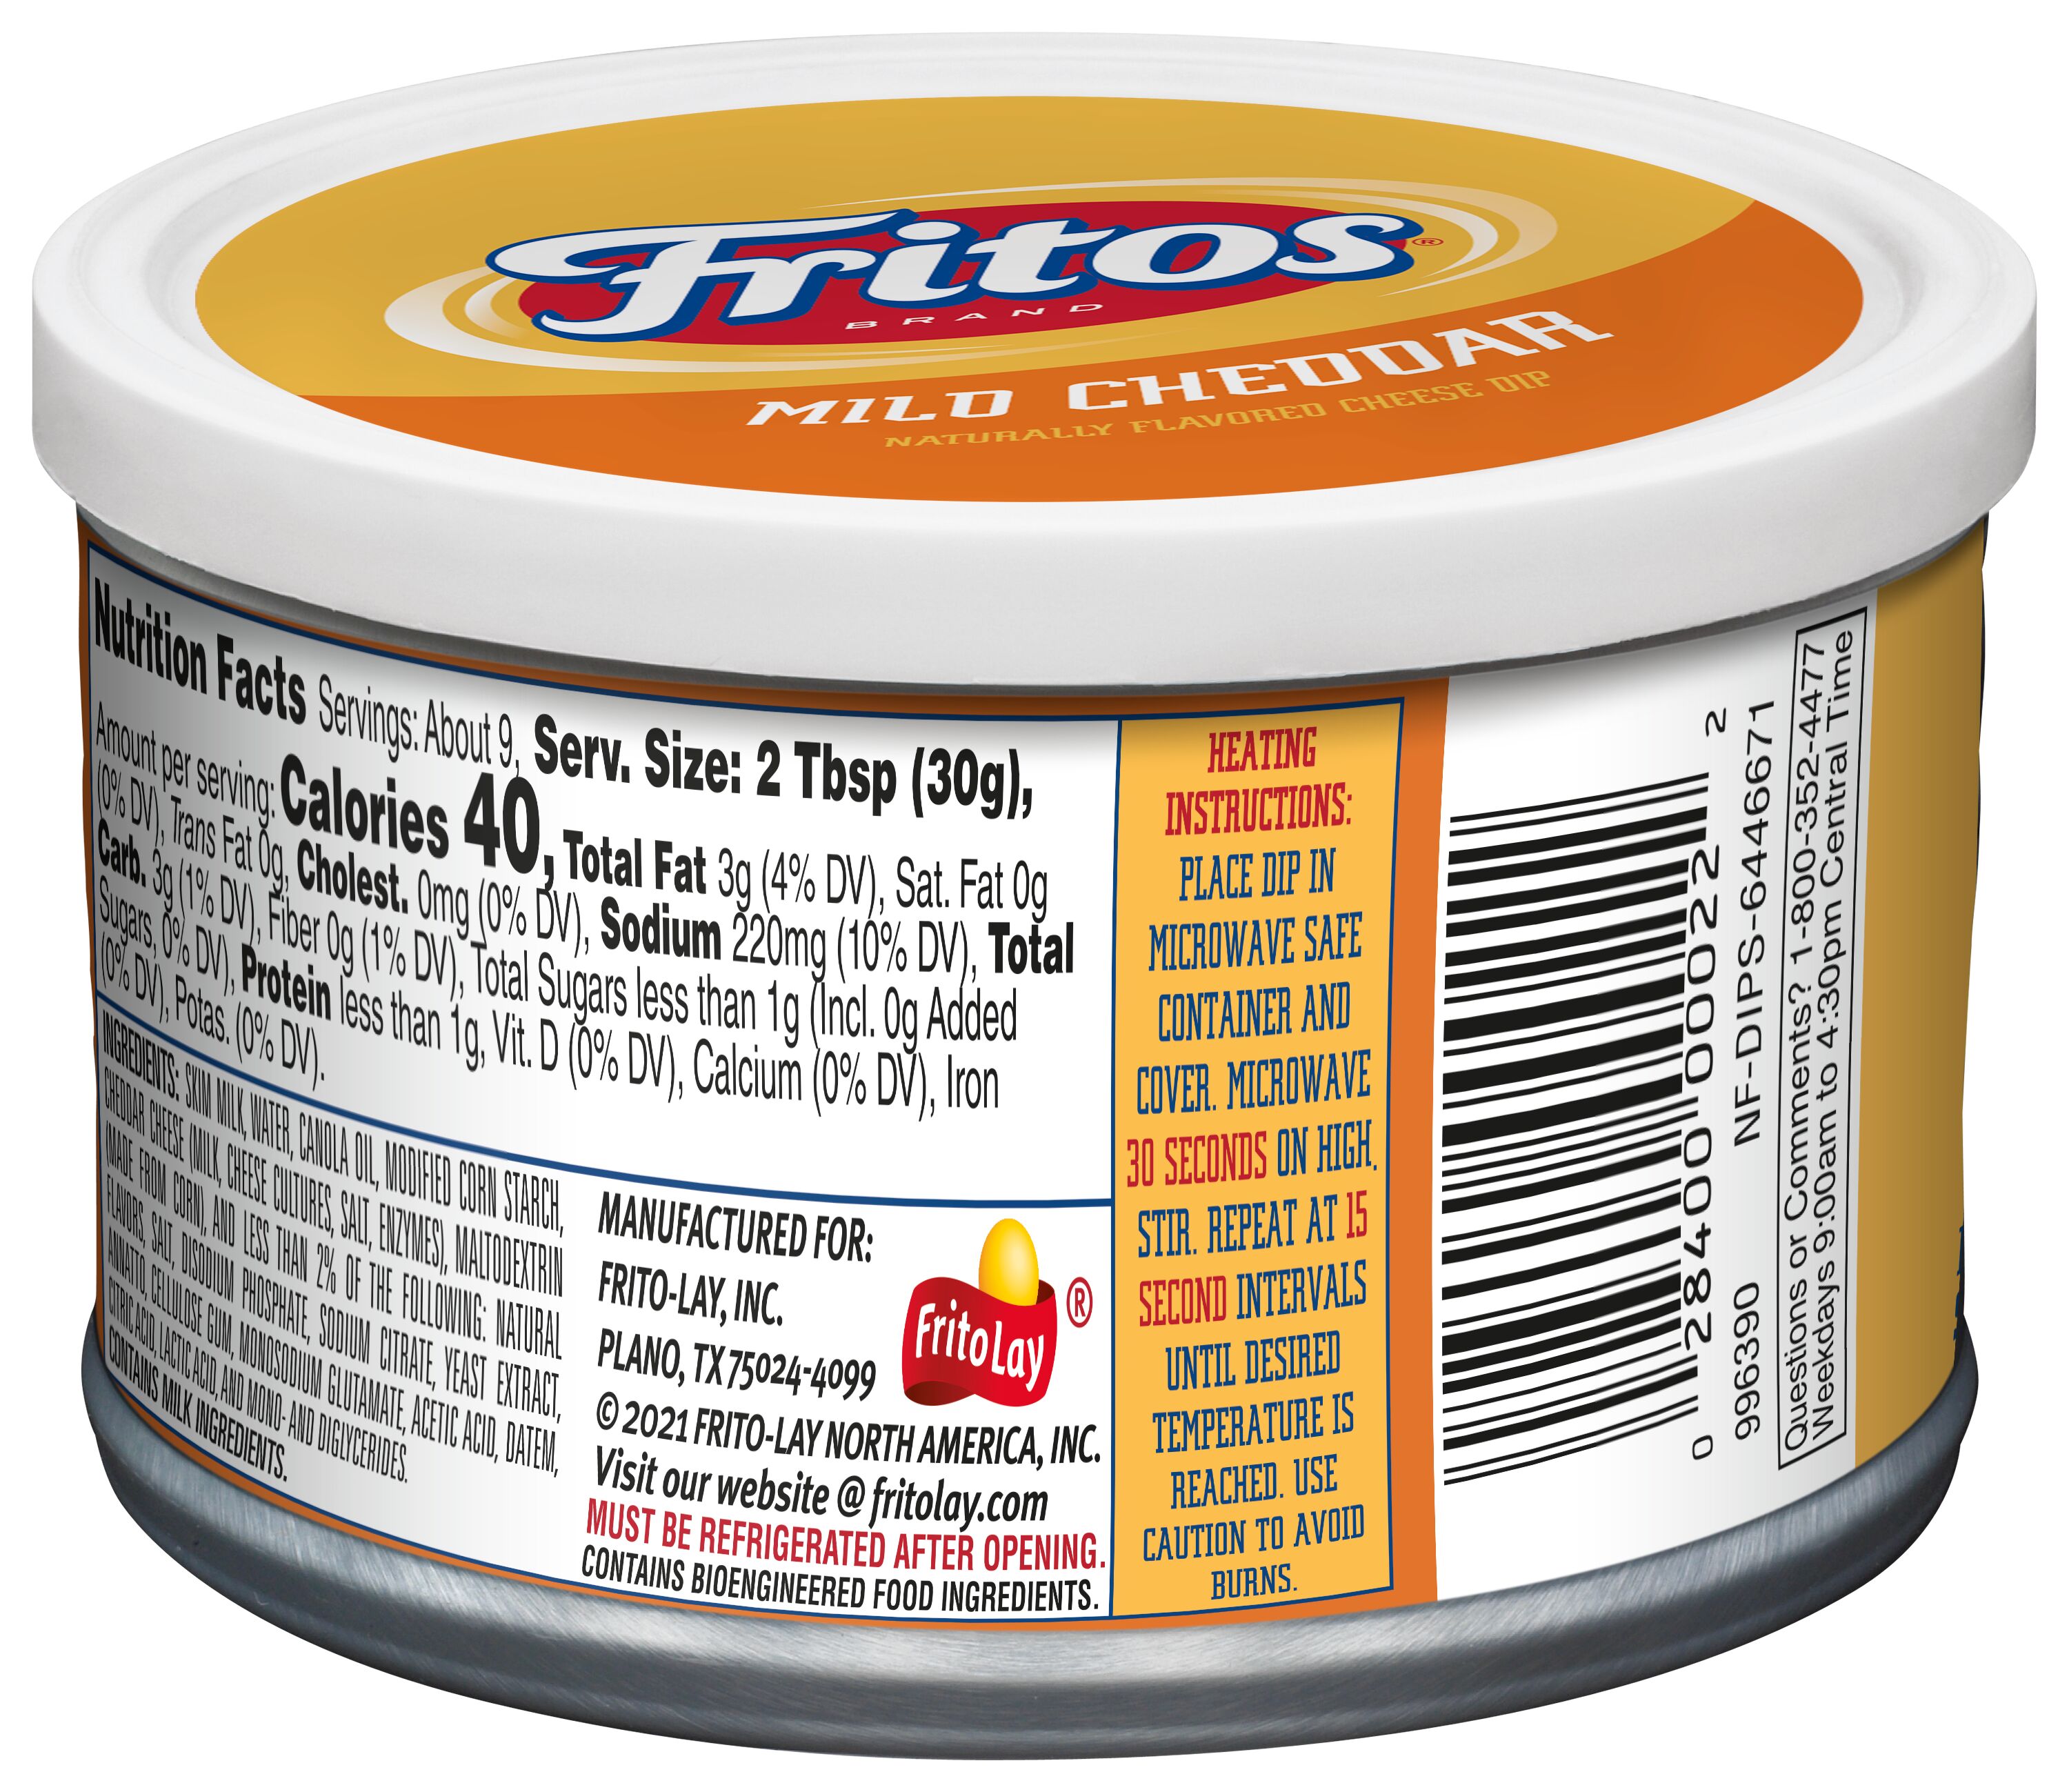 Fritos Mild Cheddar Flavored Cheese Dip, 9 oz Shelf-stable Can - image 5 of 9